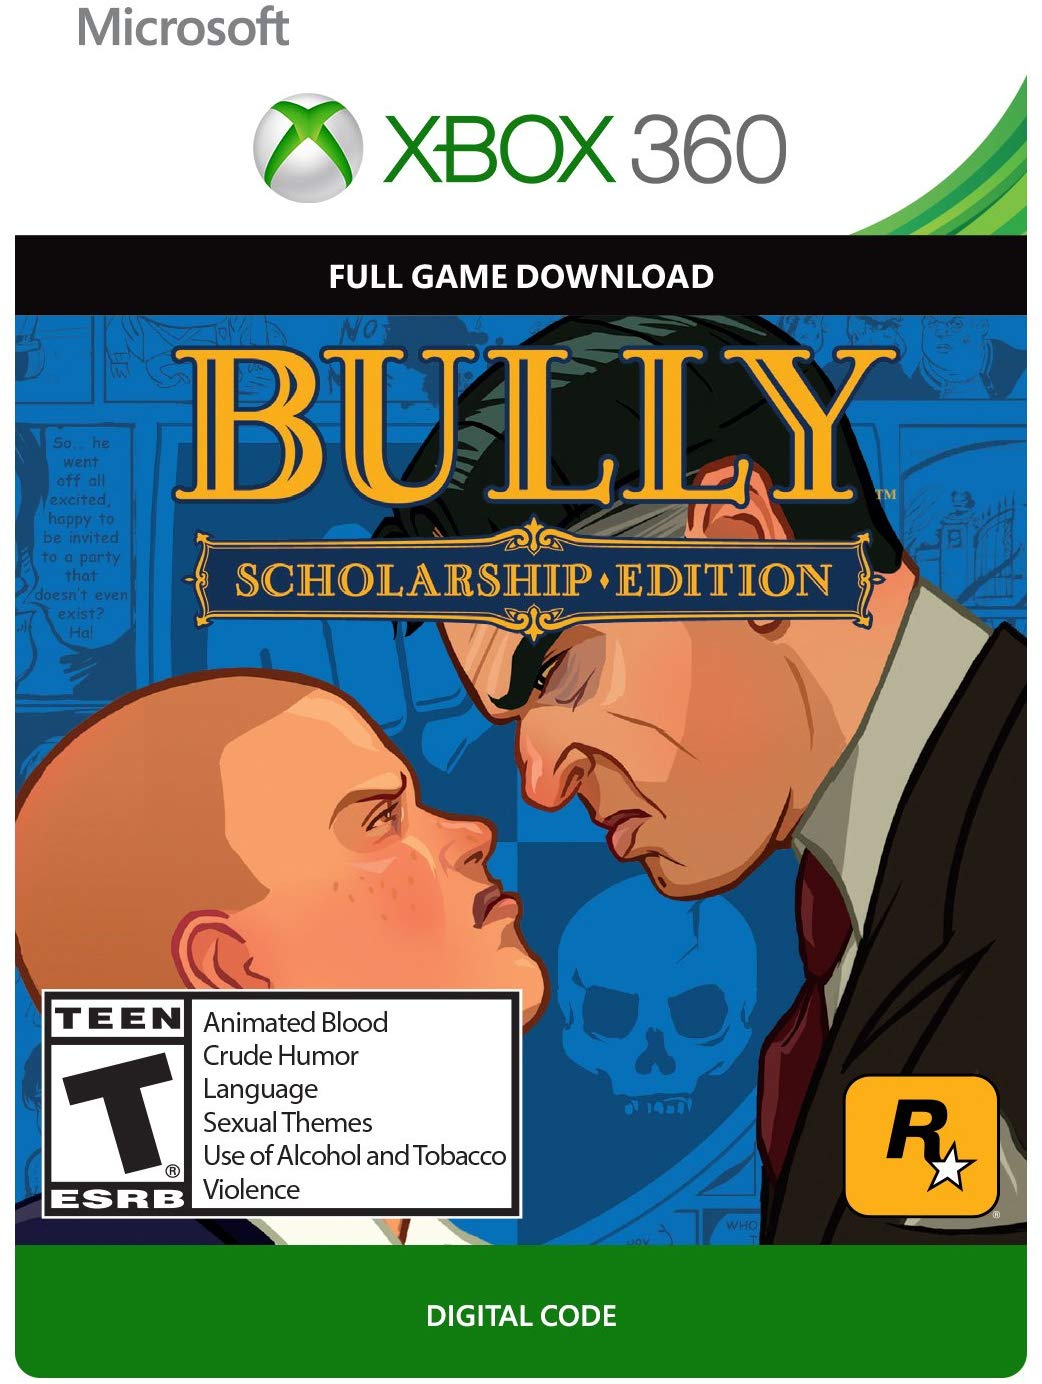 bully scholarship edition free download android